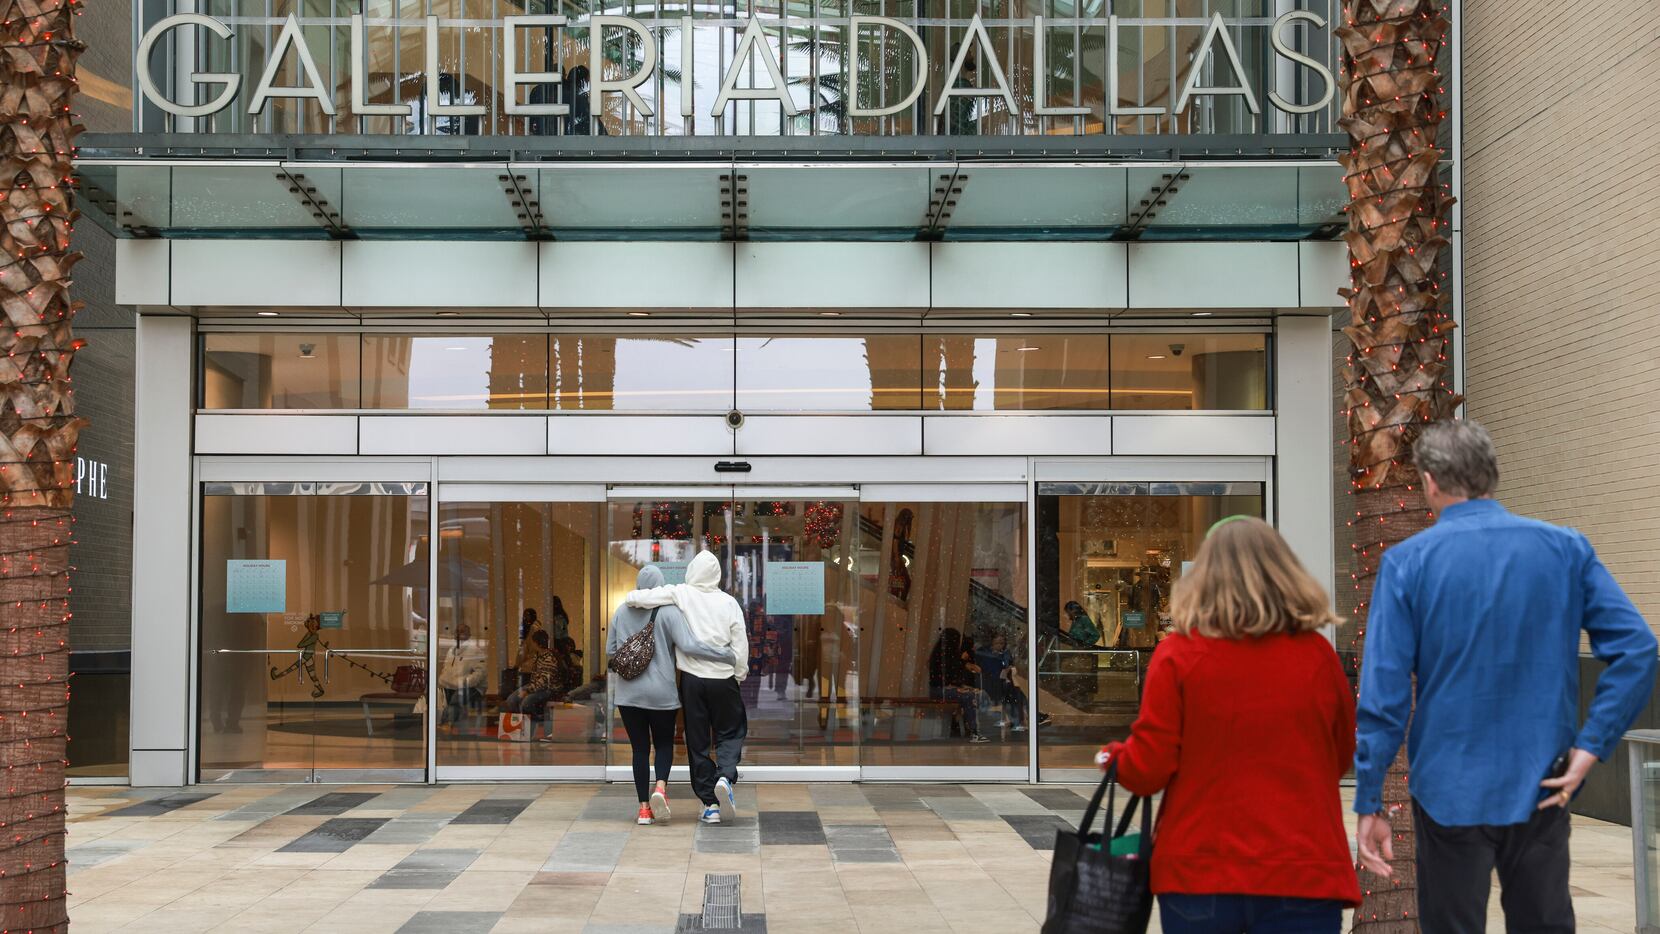 Dallas' Galleria would shrink its retail footprint as part of a planned  makeover